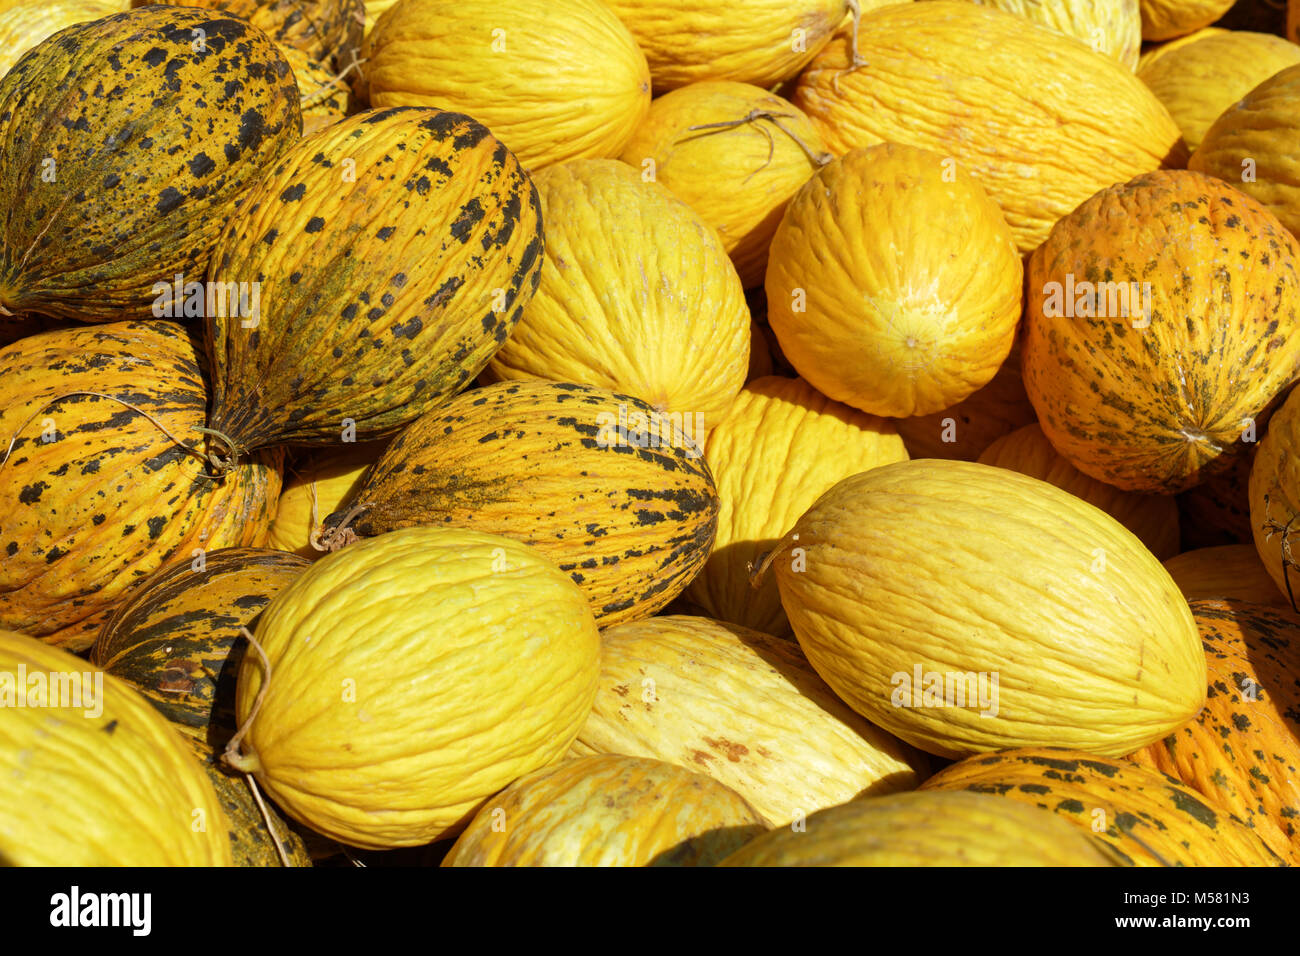 Turkish fresh melons on a market stall Stock Photo